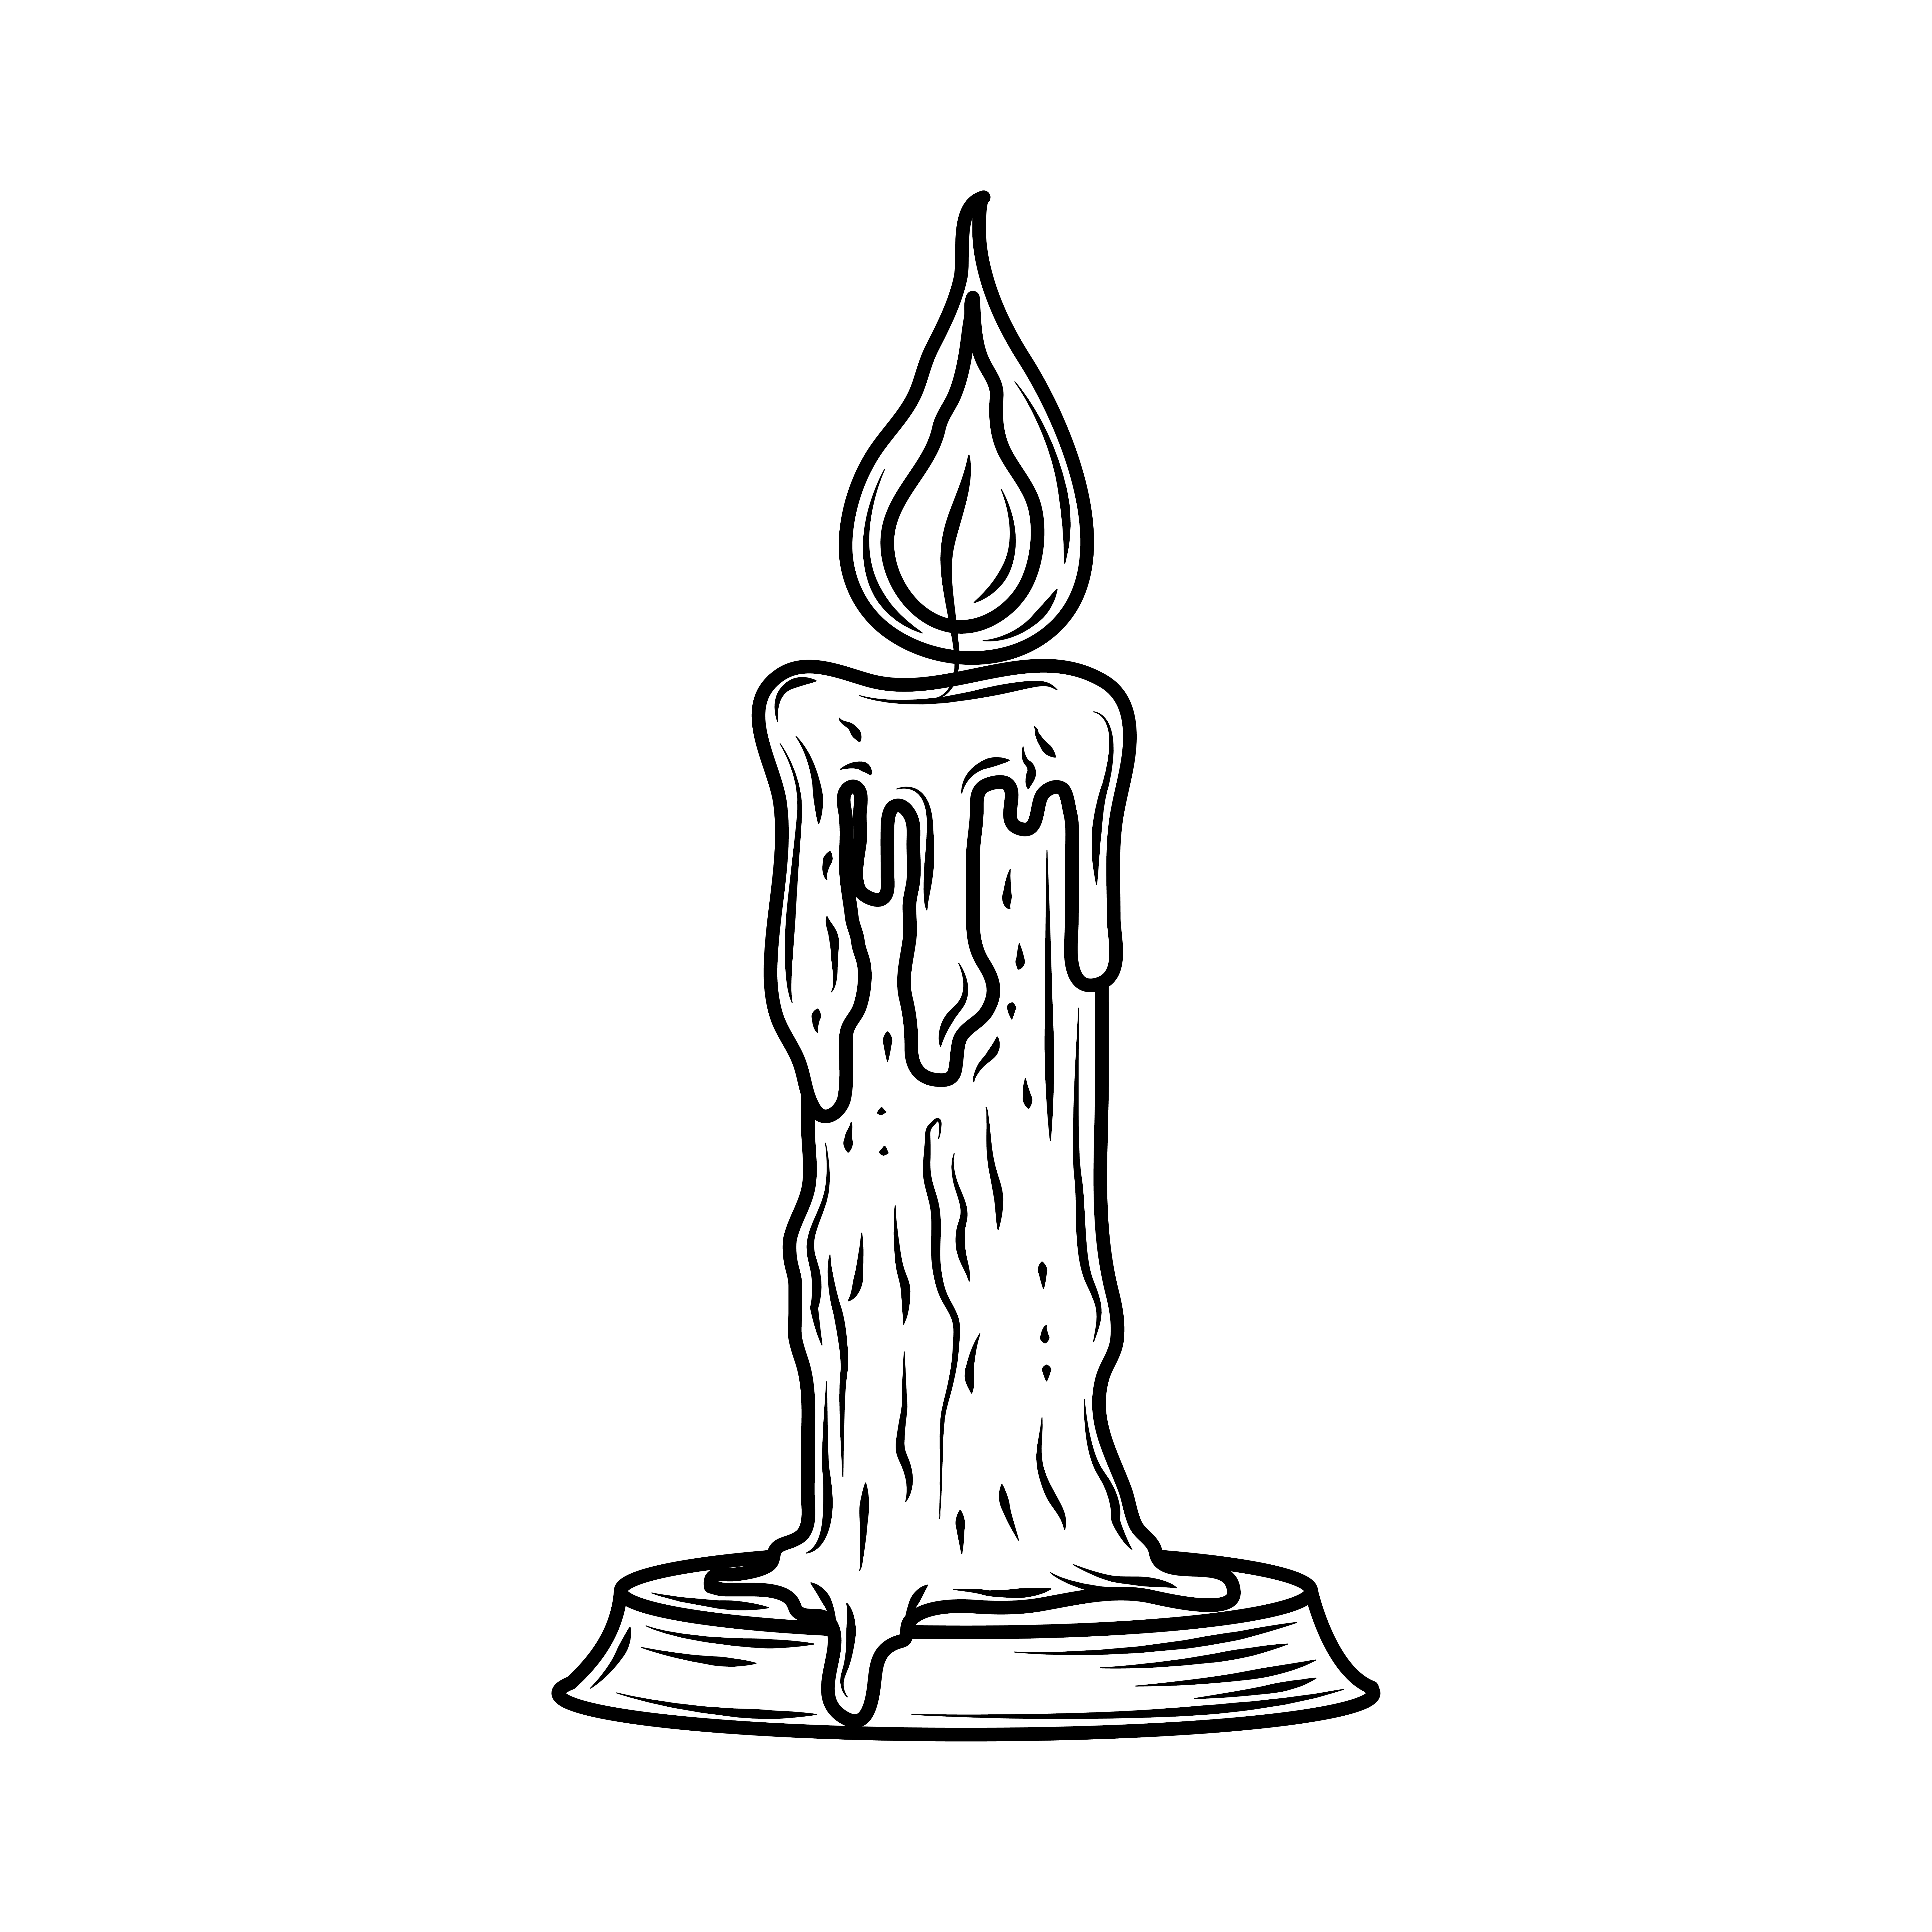 Candle Hand Drawn Set Stock Illustration  Download Image Now  Candle  Drawing  Activity Illustration  iStock